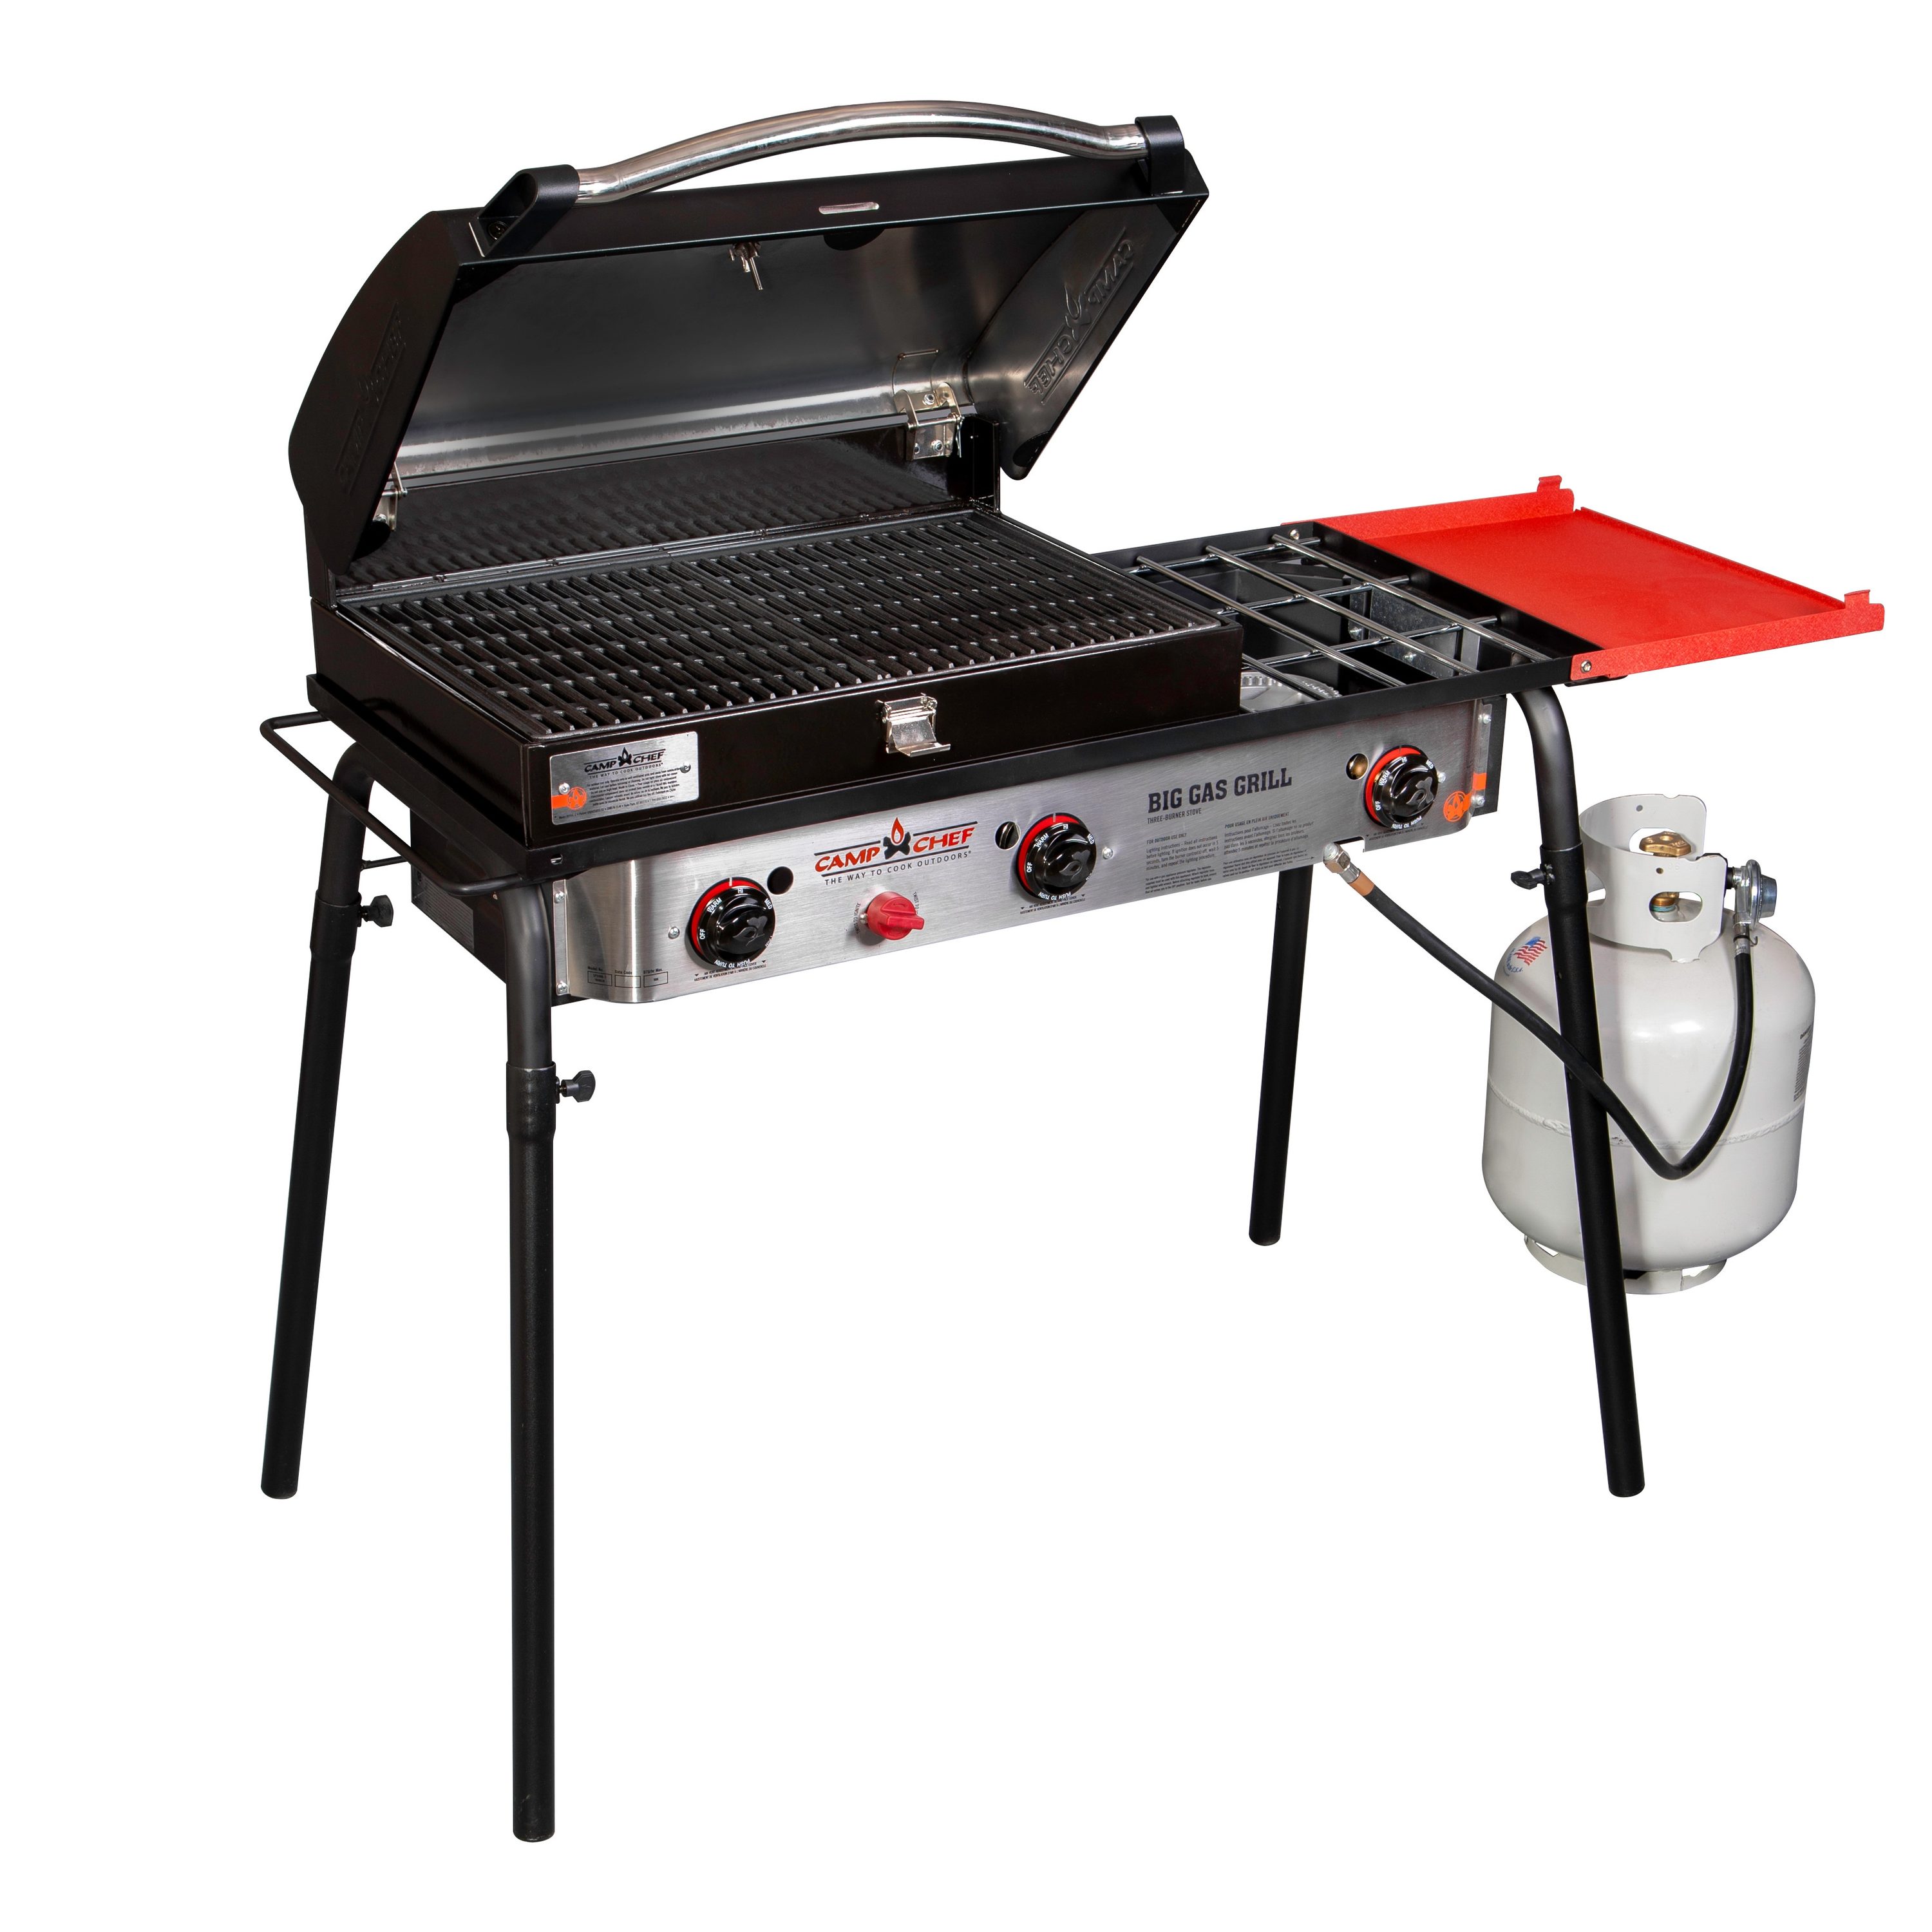 Big Gas Grill 3-Burners Electronic Aluminized Steel Outdoor in the Outdoor Burners & Stoves department at Lowes.com